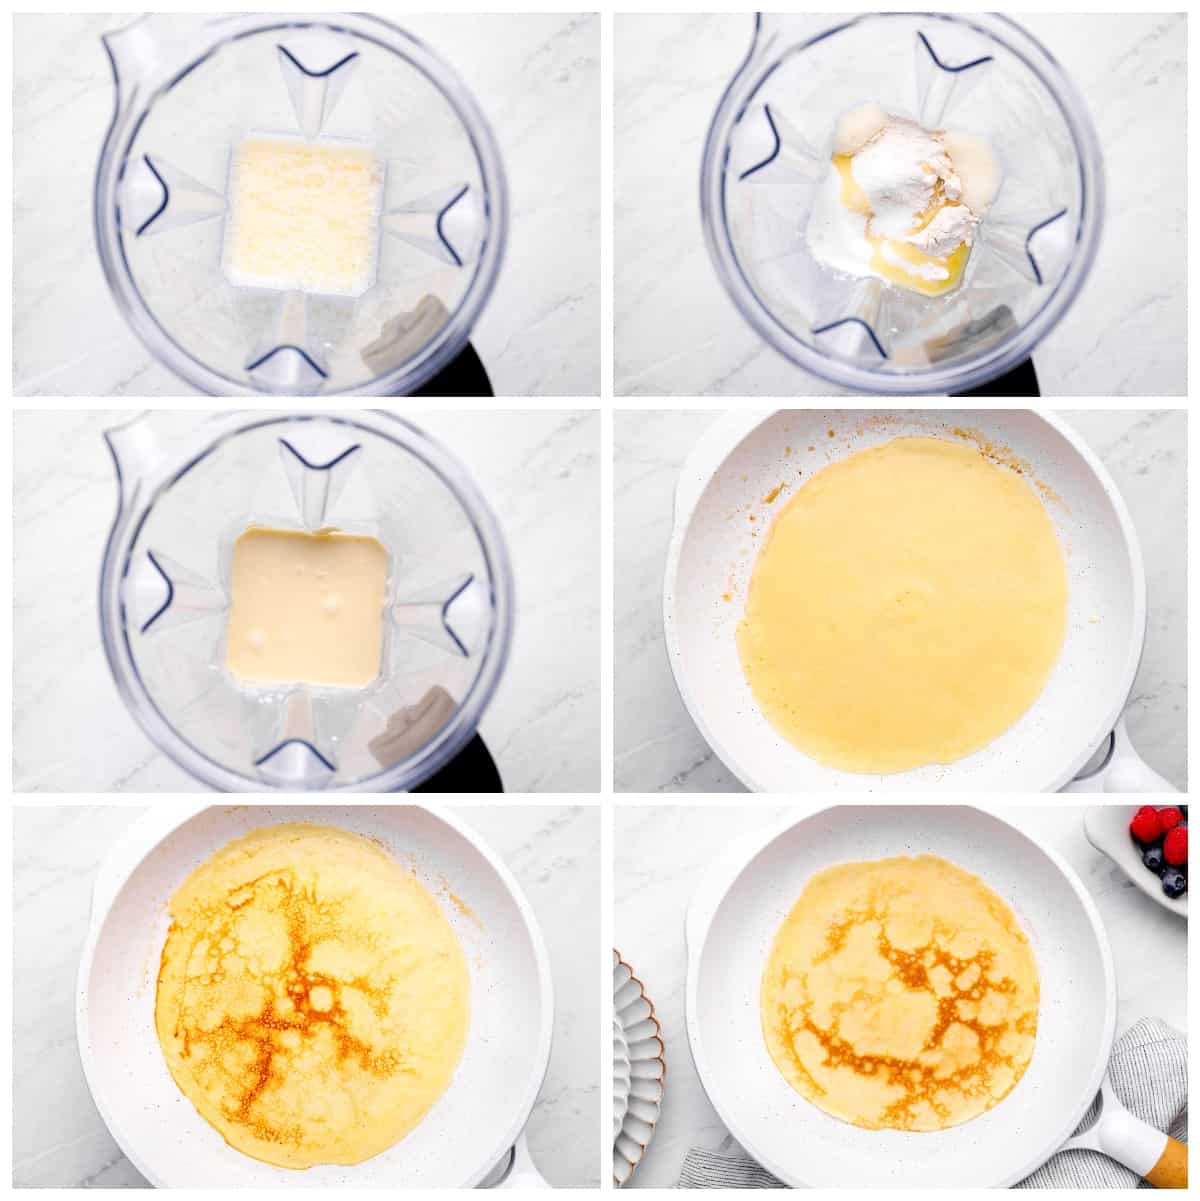 how to make crepes step by step photo instructions